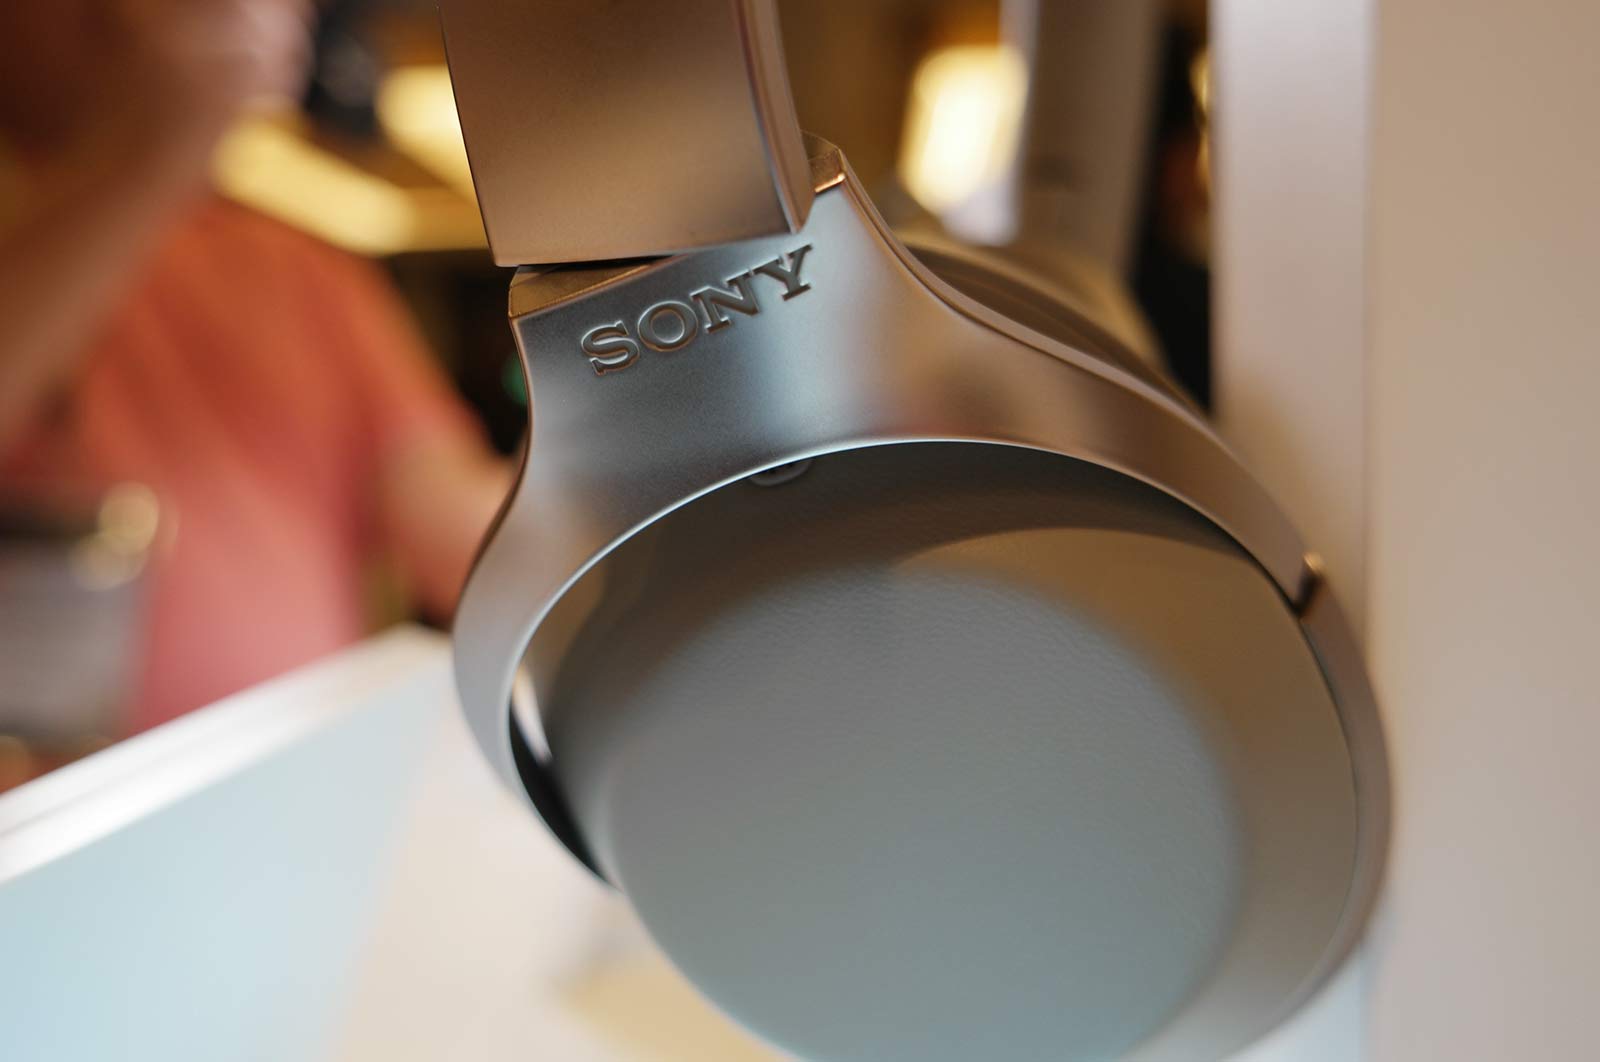 Sony's MDR-1000X at IFA 2016